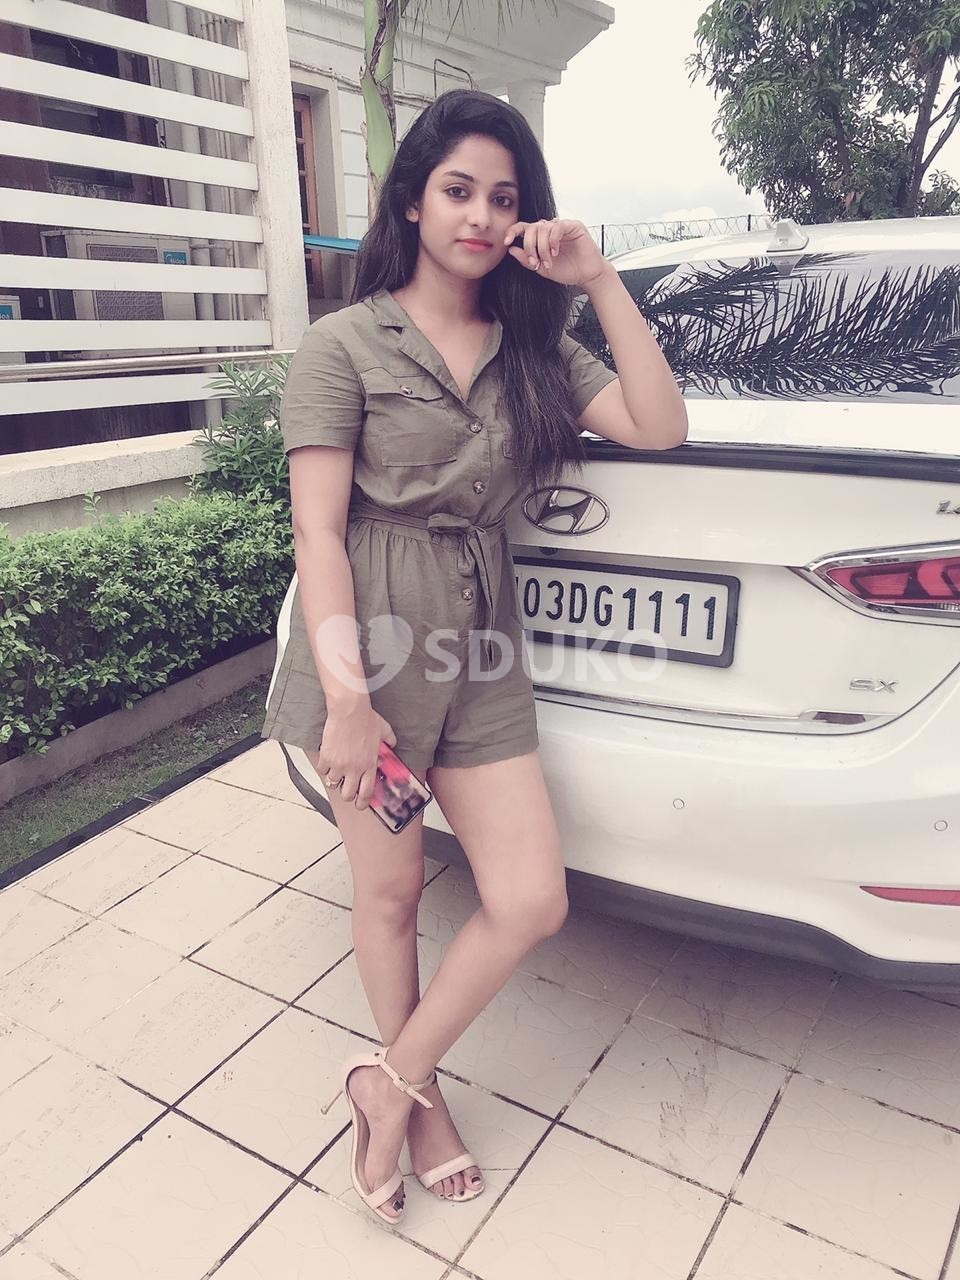 MY SELF KAVYA BEST grinder Noida CALL GIRL ESCORTS SERVICE IN/OUT VIP INDEPENDENT CALL GIRLS SERVICE ALL SEX ALLOW BOOK